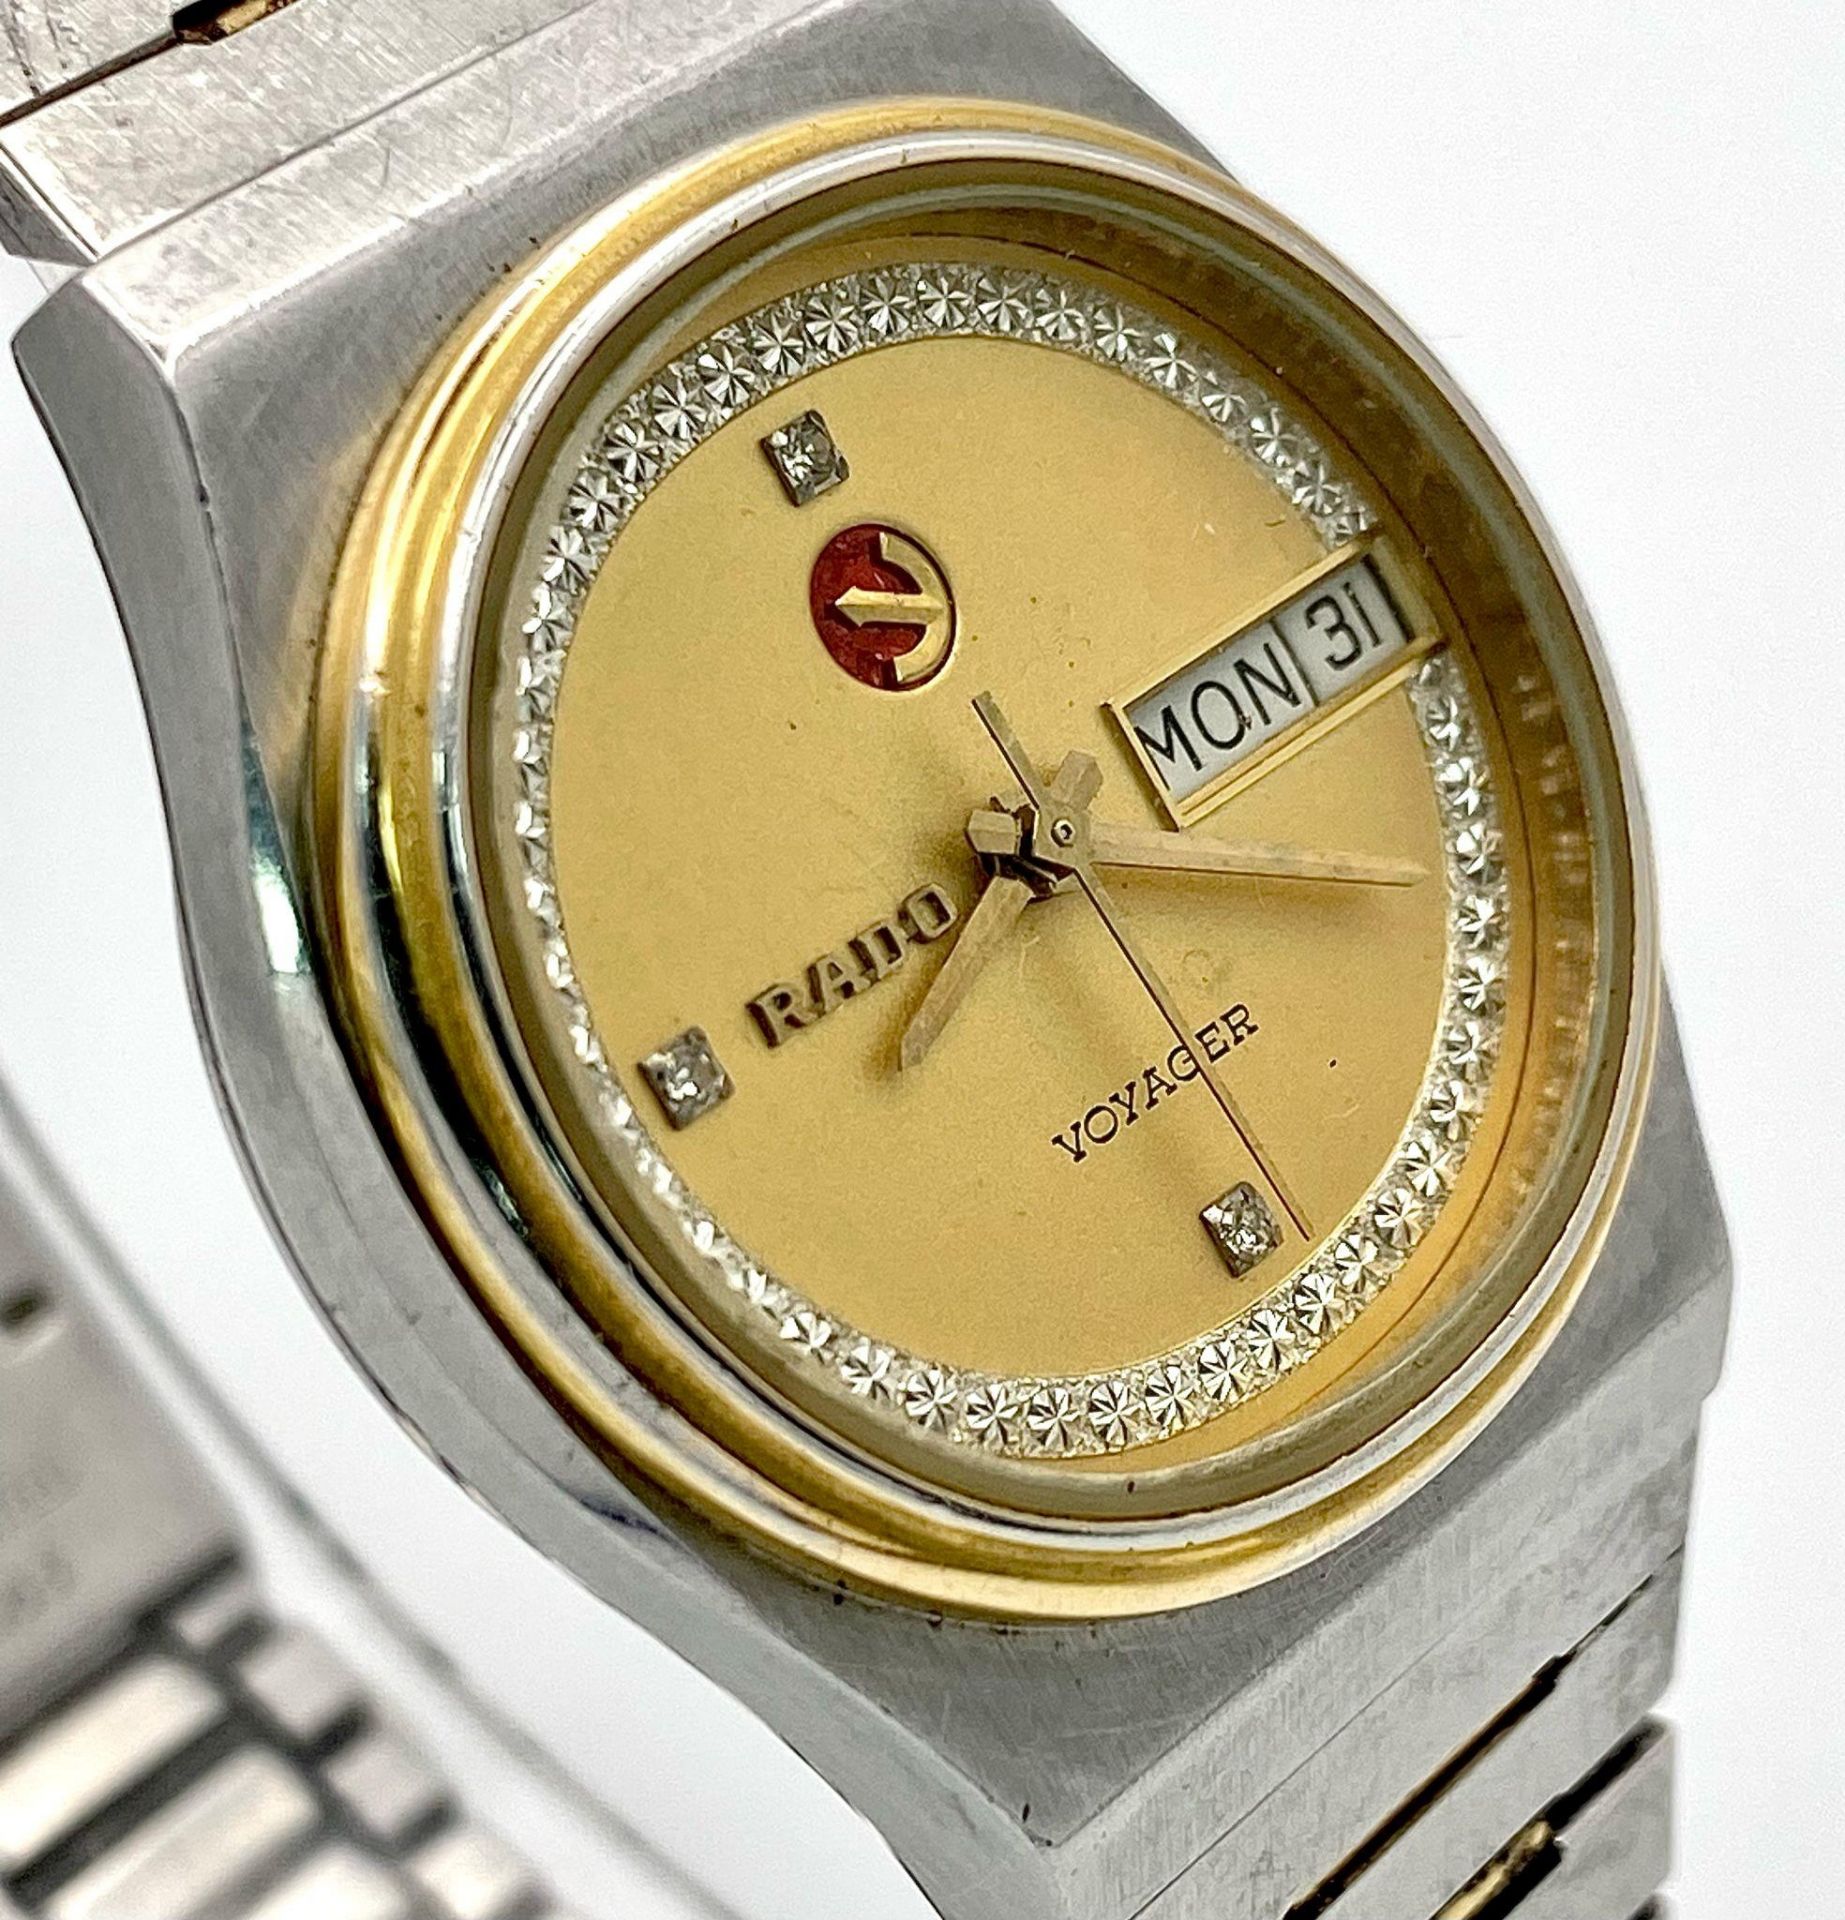 A Vintage Rado Voyager Automatic Unisex Watch. Stainless steel bracelet and case - 33mm. Gilded dial - Bild 4 aus 7